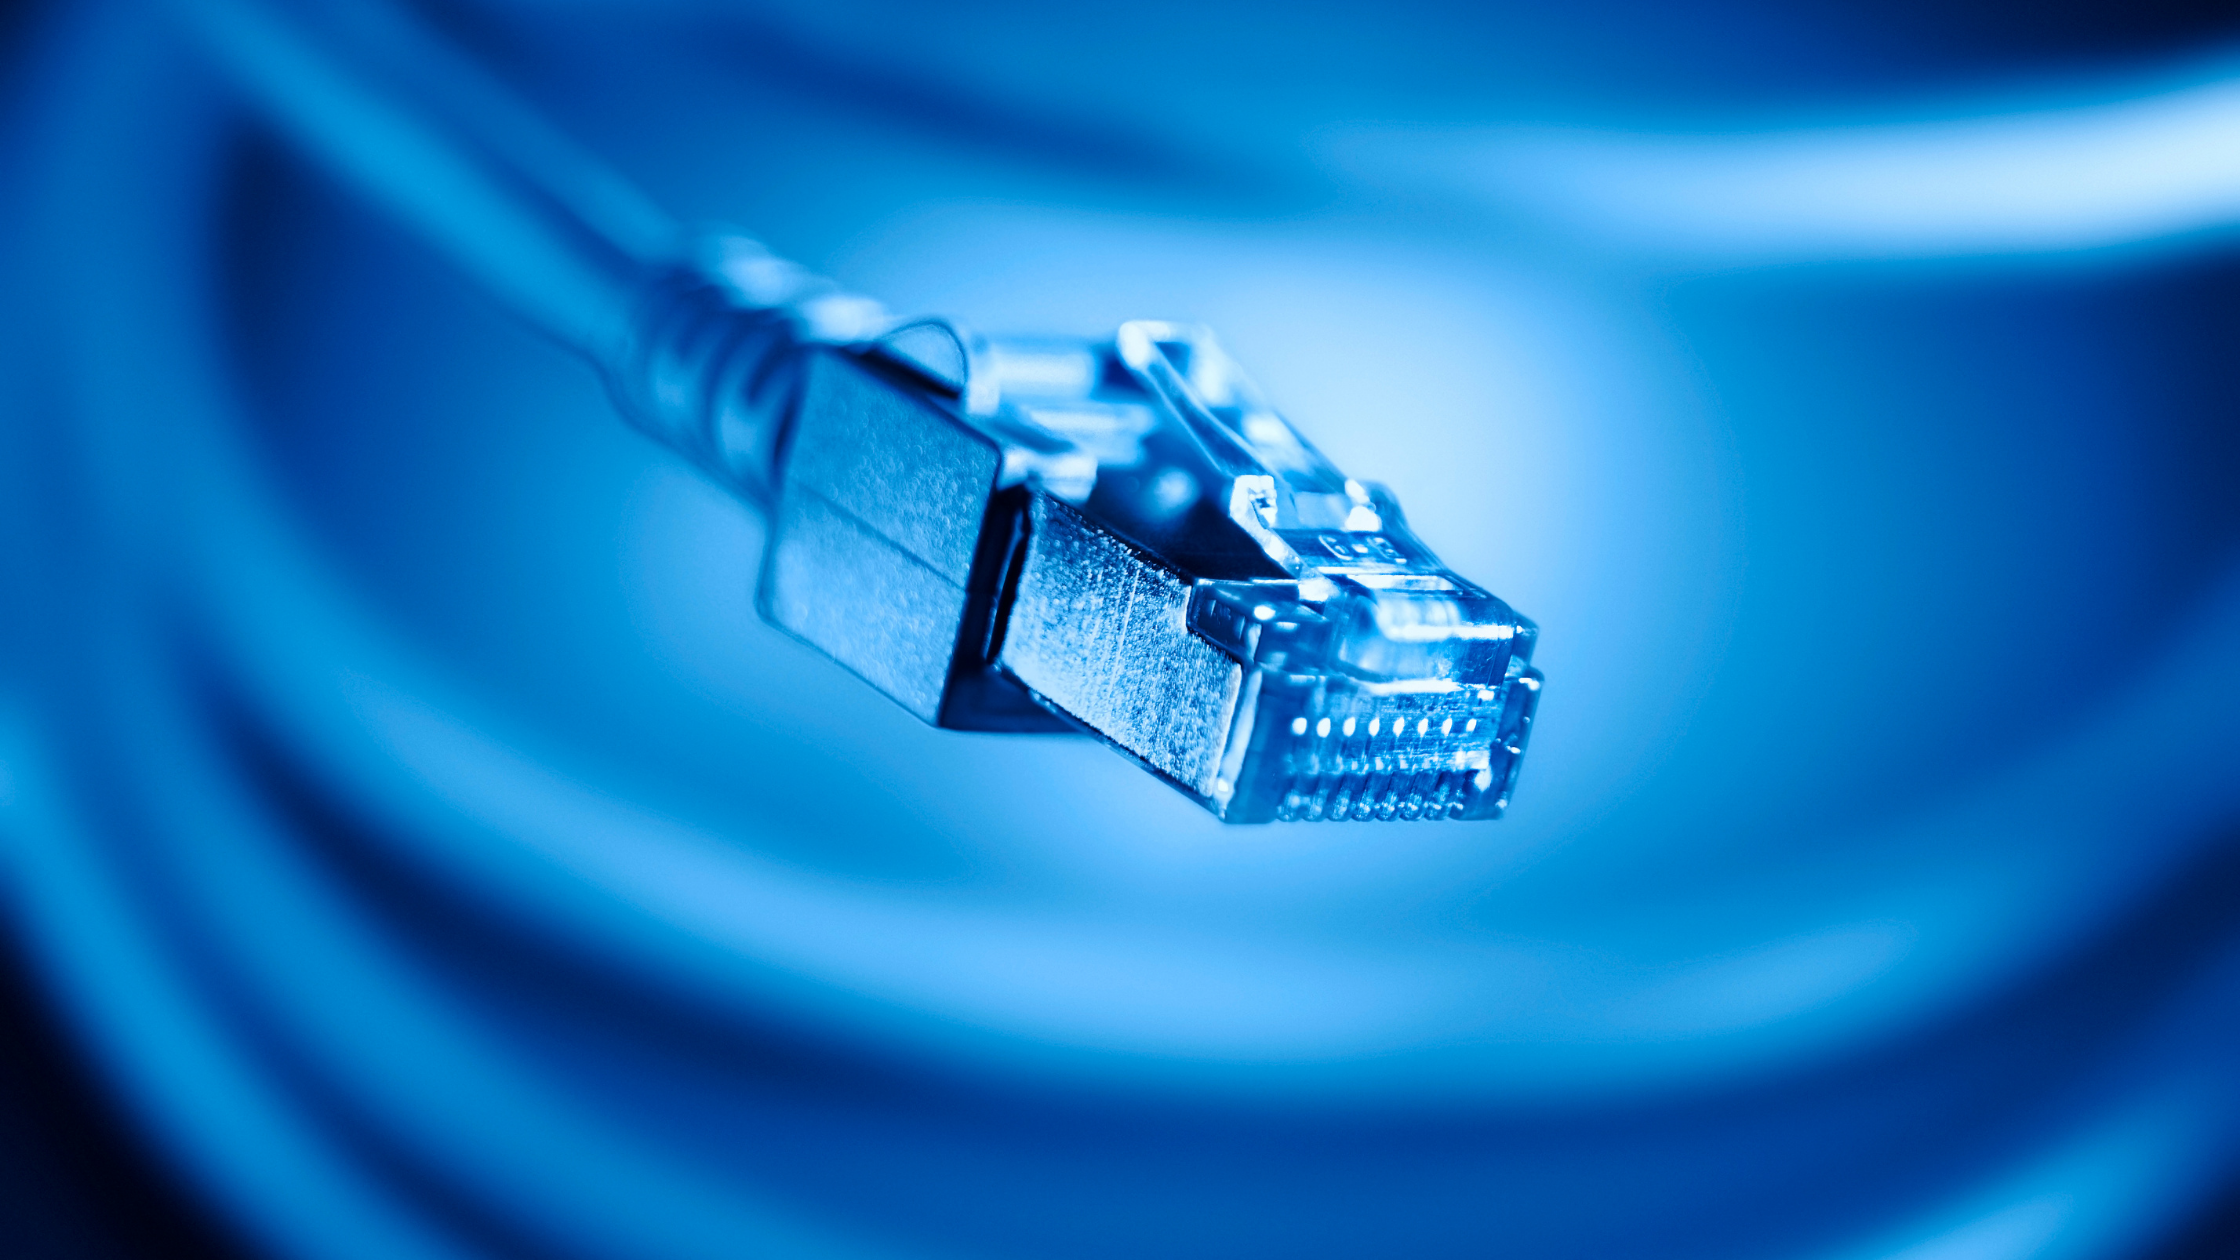 Ethernet, FTTC or ADSL? Which Is Best For Your Business?